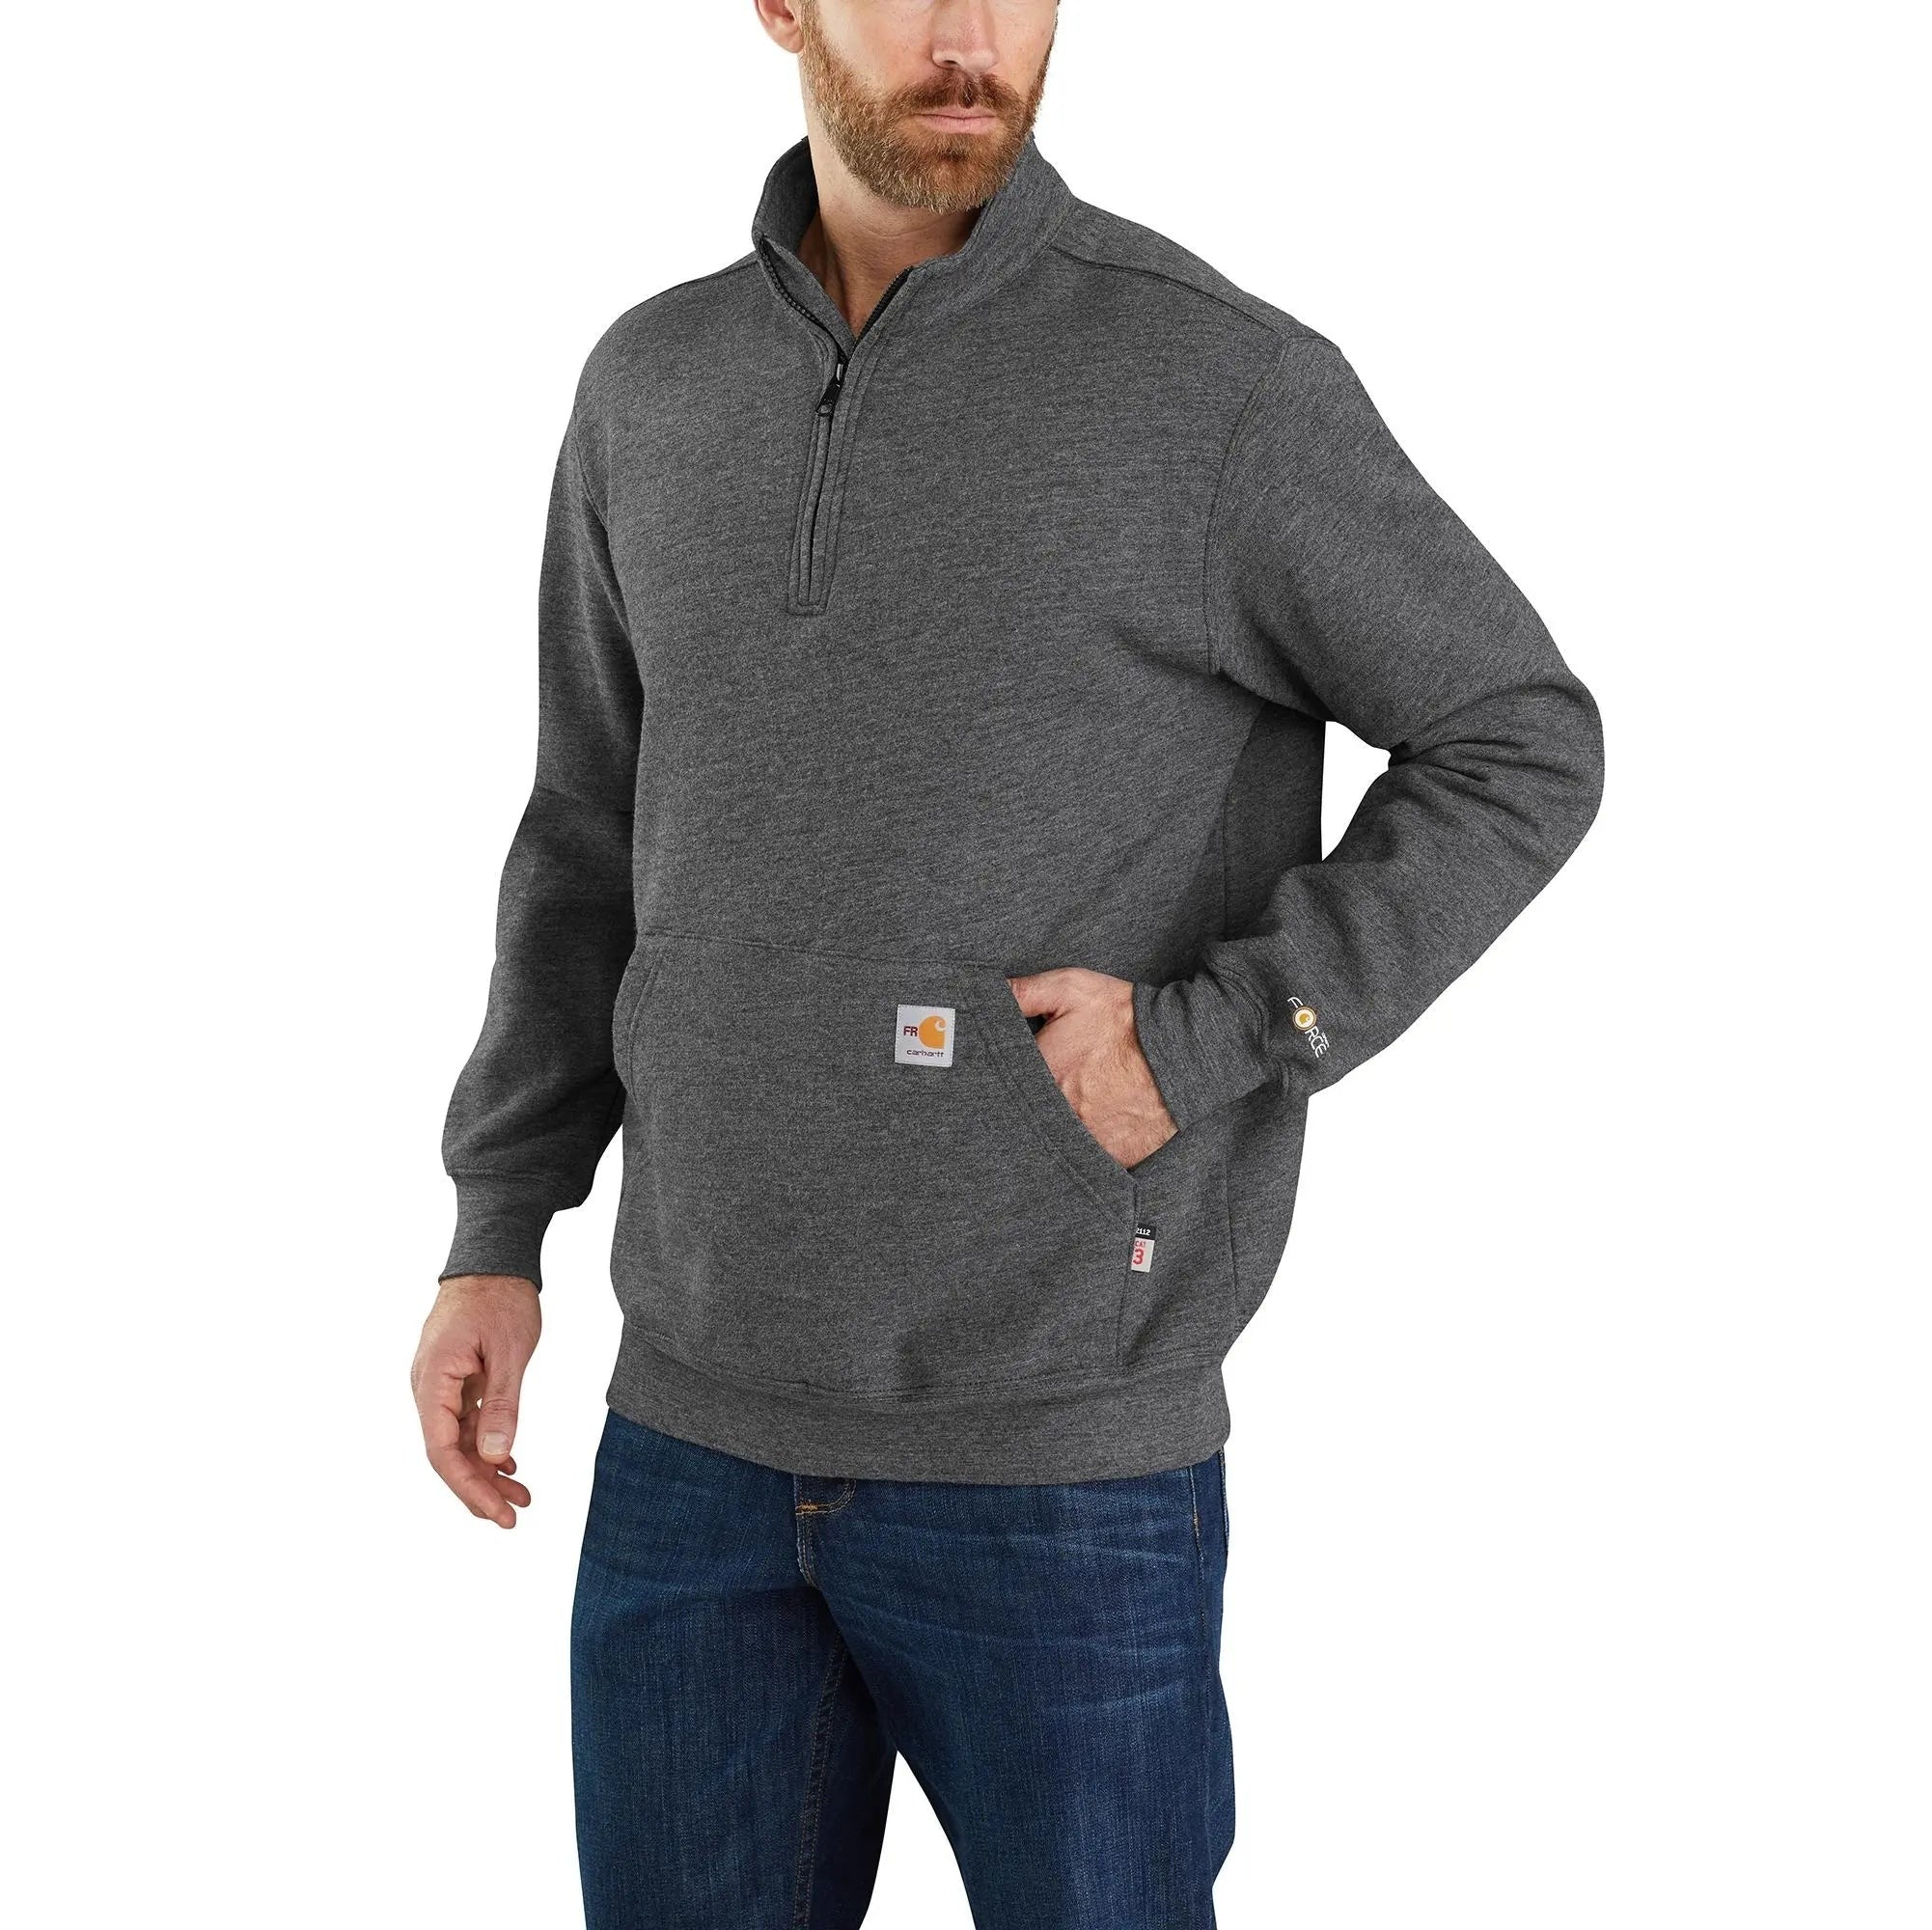 CARHARTT - Flame Resistant Force Loose Fit Midweight Quarter-Zip Sweatshirt - Becker Safety and Supply